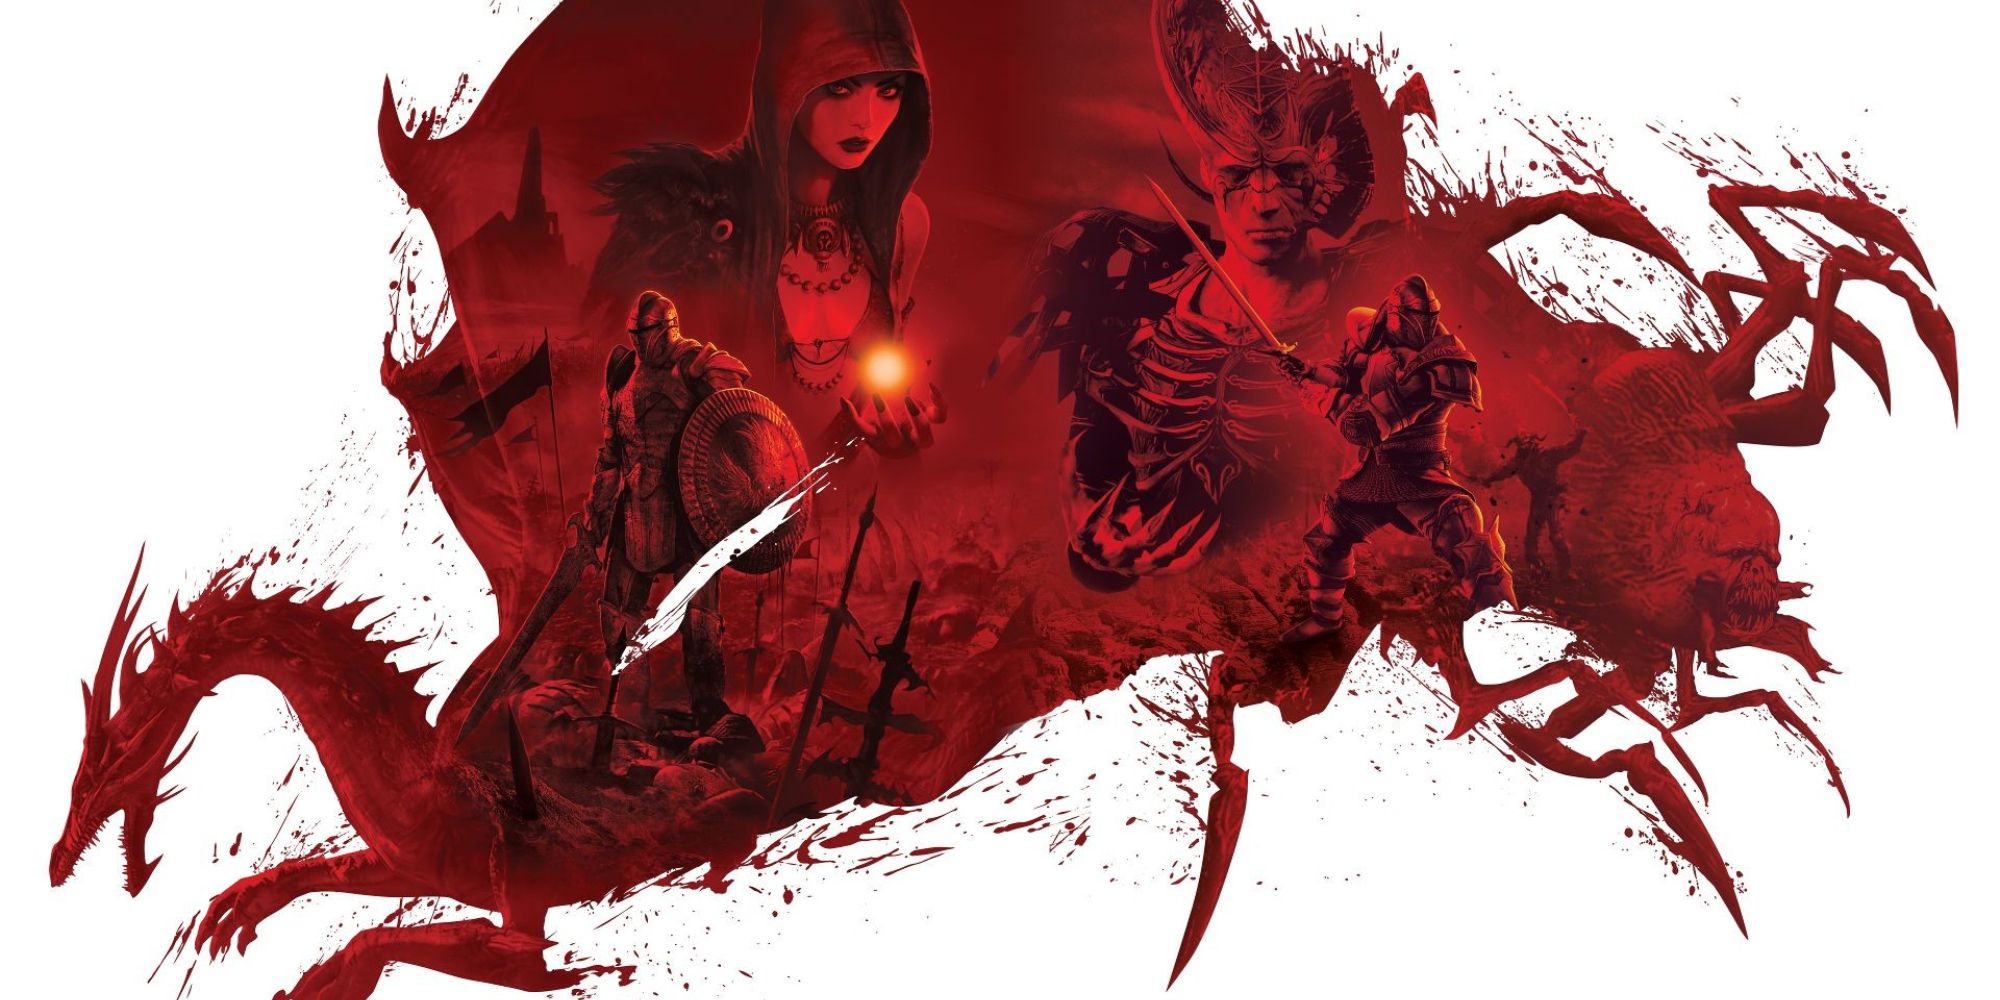 EA Scrapped A Diablo-Style Dragon Age Mobile Game Before Going Free-To-Play